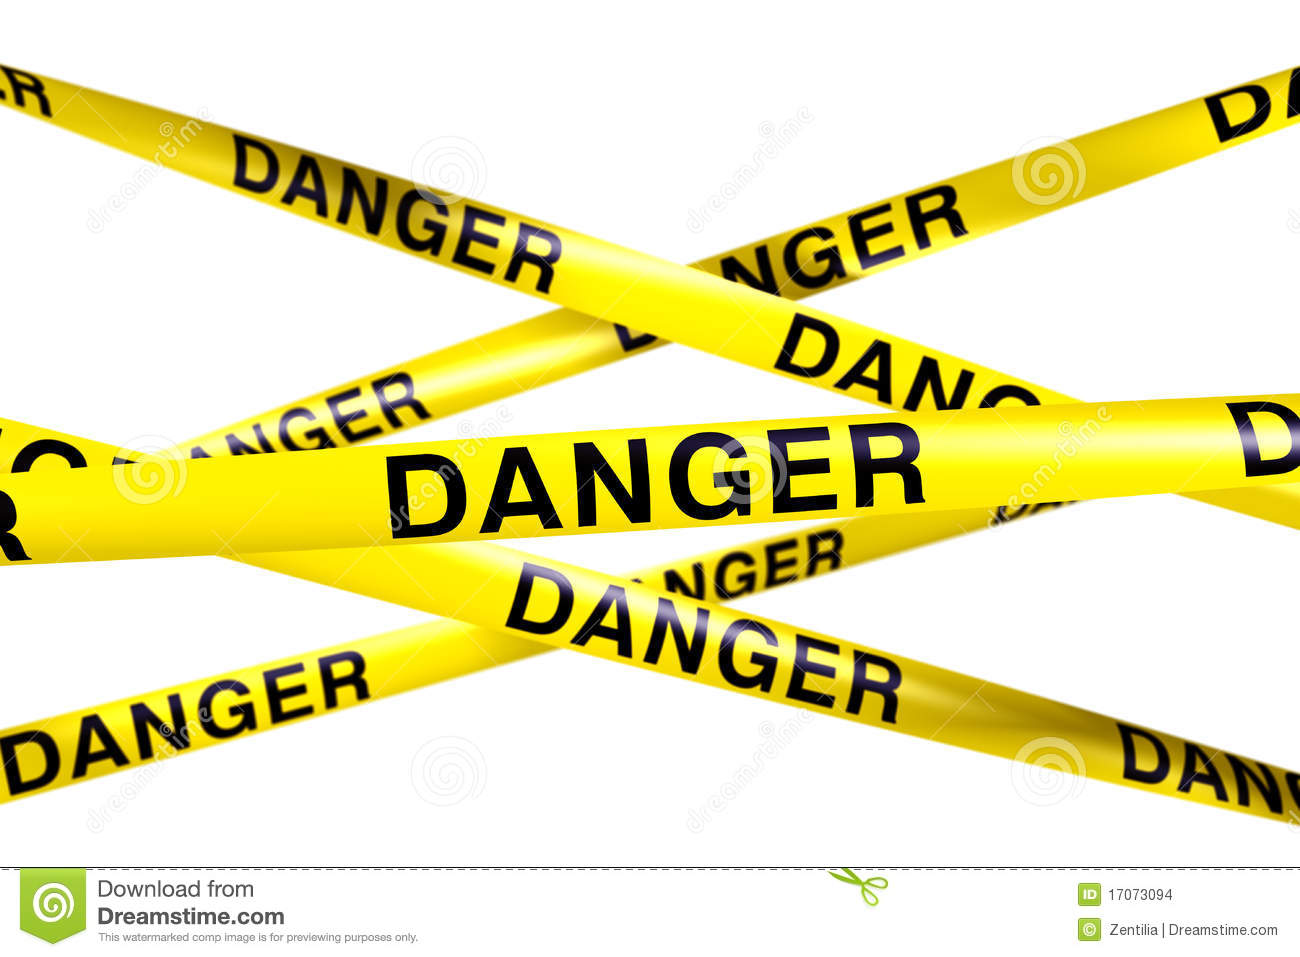 3d Rendering Of Caution Tape With Danger Written On It